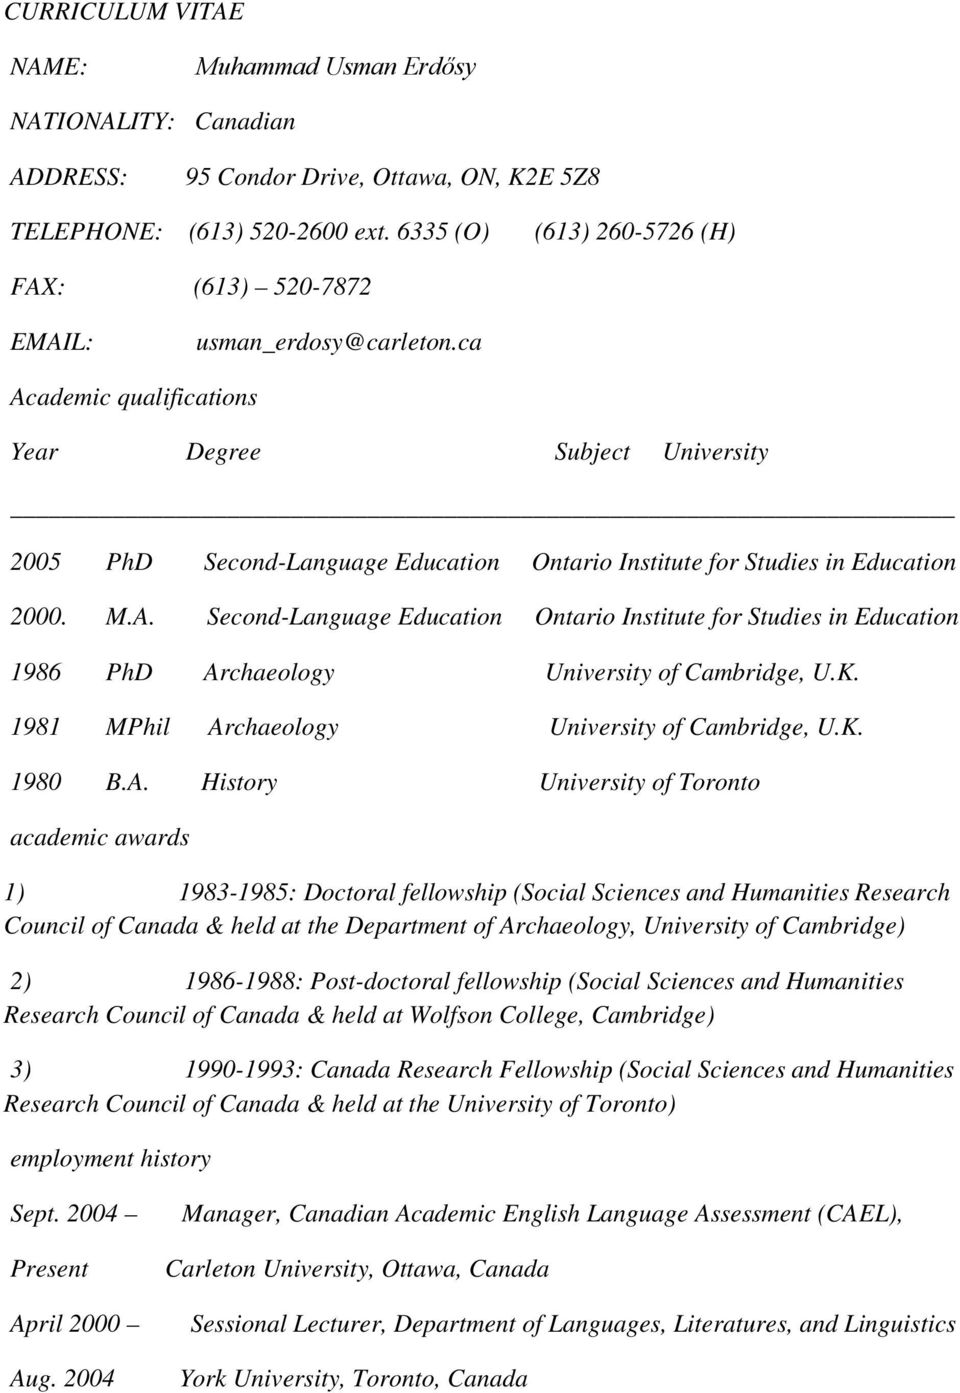 ca Academic qualifications Year Degree Subject University 2005 PhD Second-Language Education Ontario Institute for Studies in Education 2000. M.A. Second-Language Education Ontario Institute for Studies in Education 1986 PhD Archaeology University of Cambridge, U.